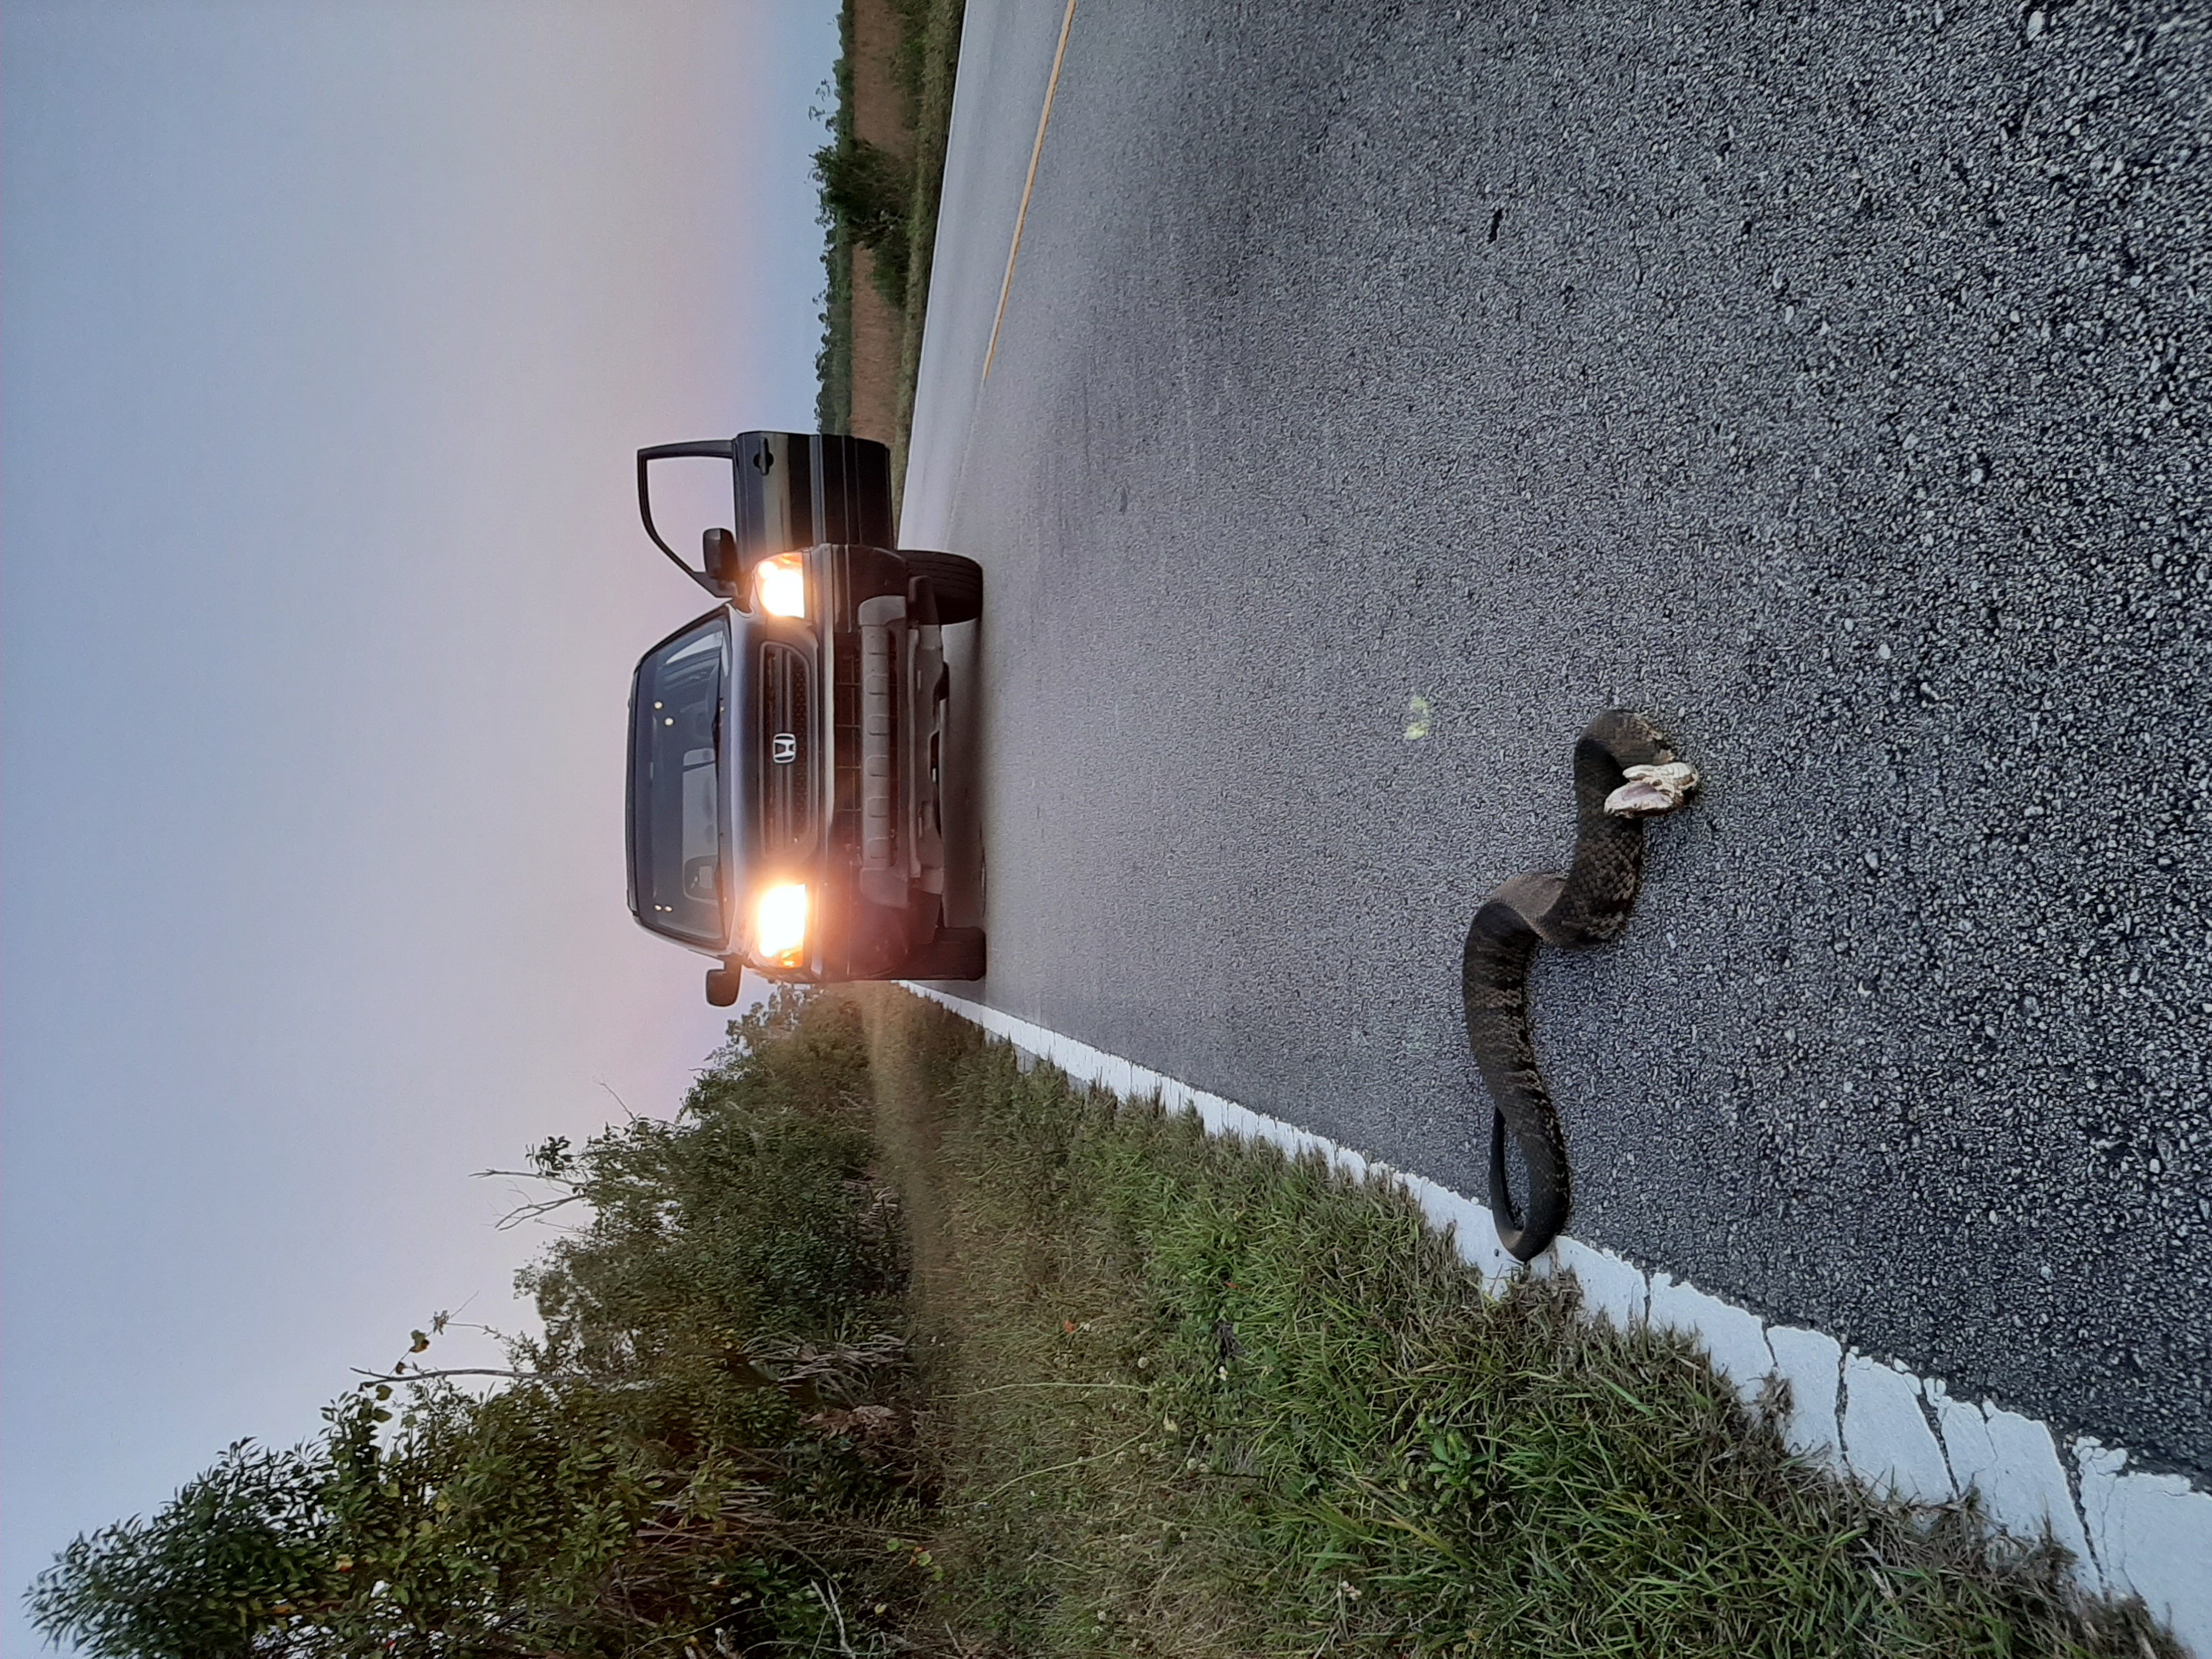 An all too frequent occurrence between wildlife and motorized vehicles, a Florida Cottonmouth, Agkistrodon conanti, encounters a vehicle in Everglades National Park. Photographed by W.E. Meshaka, Jr.